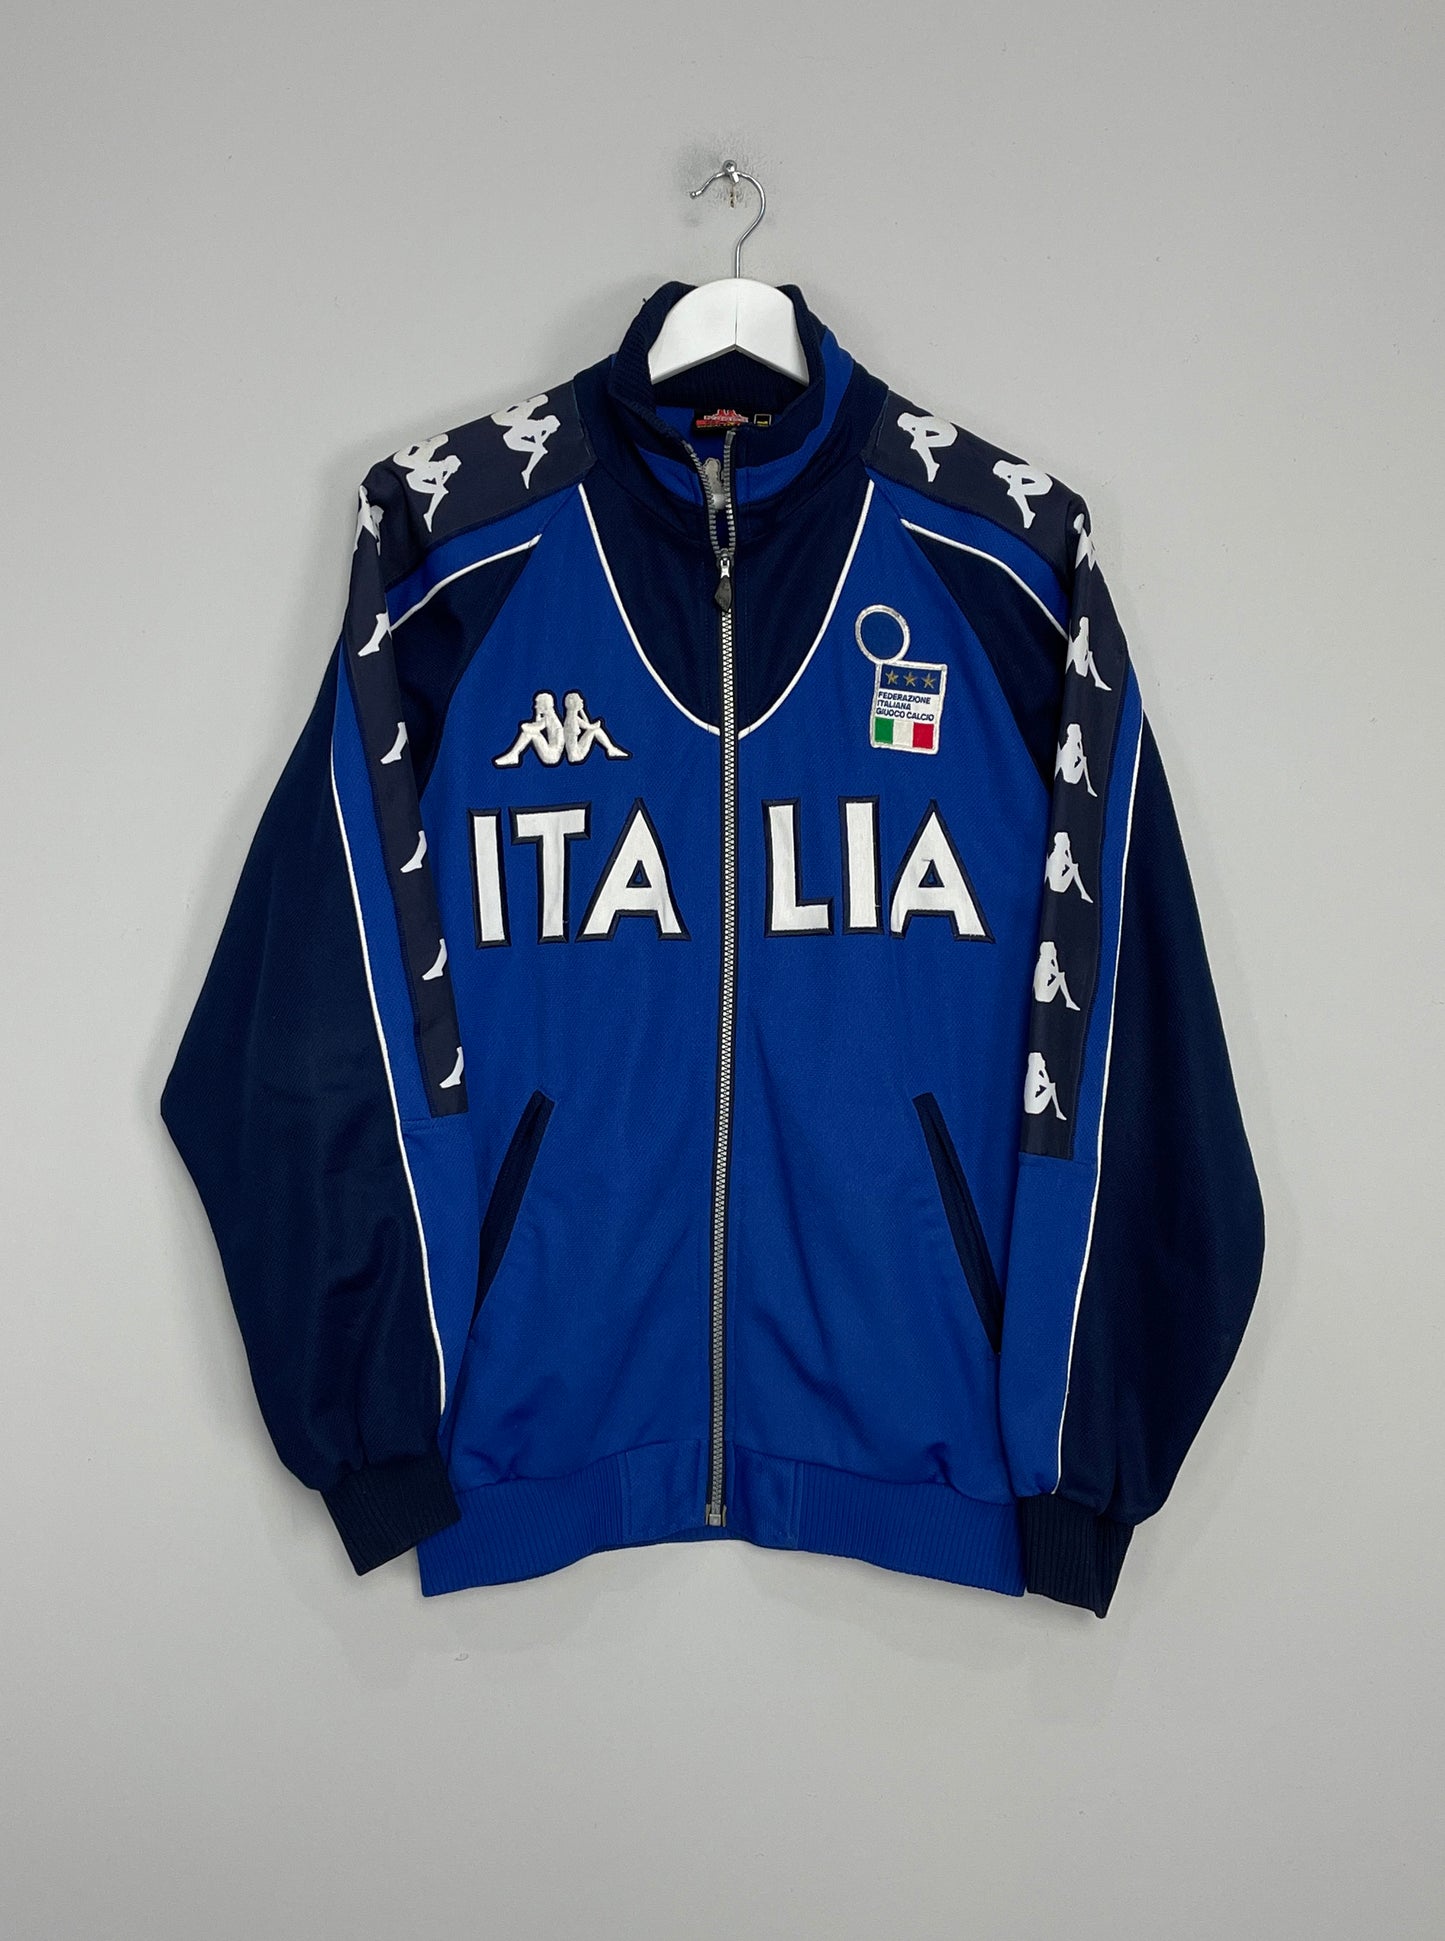 Image of the Italy jacket from the 2000/01 season